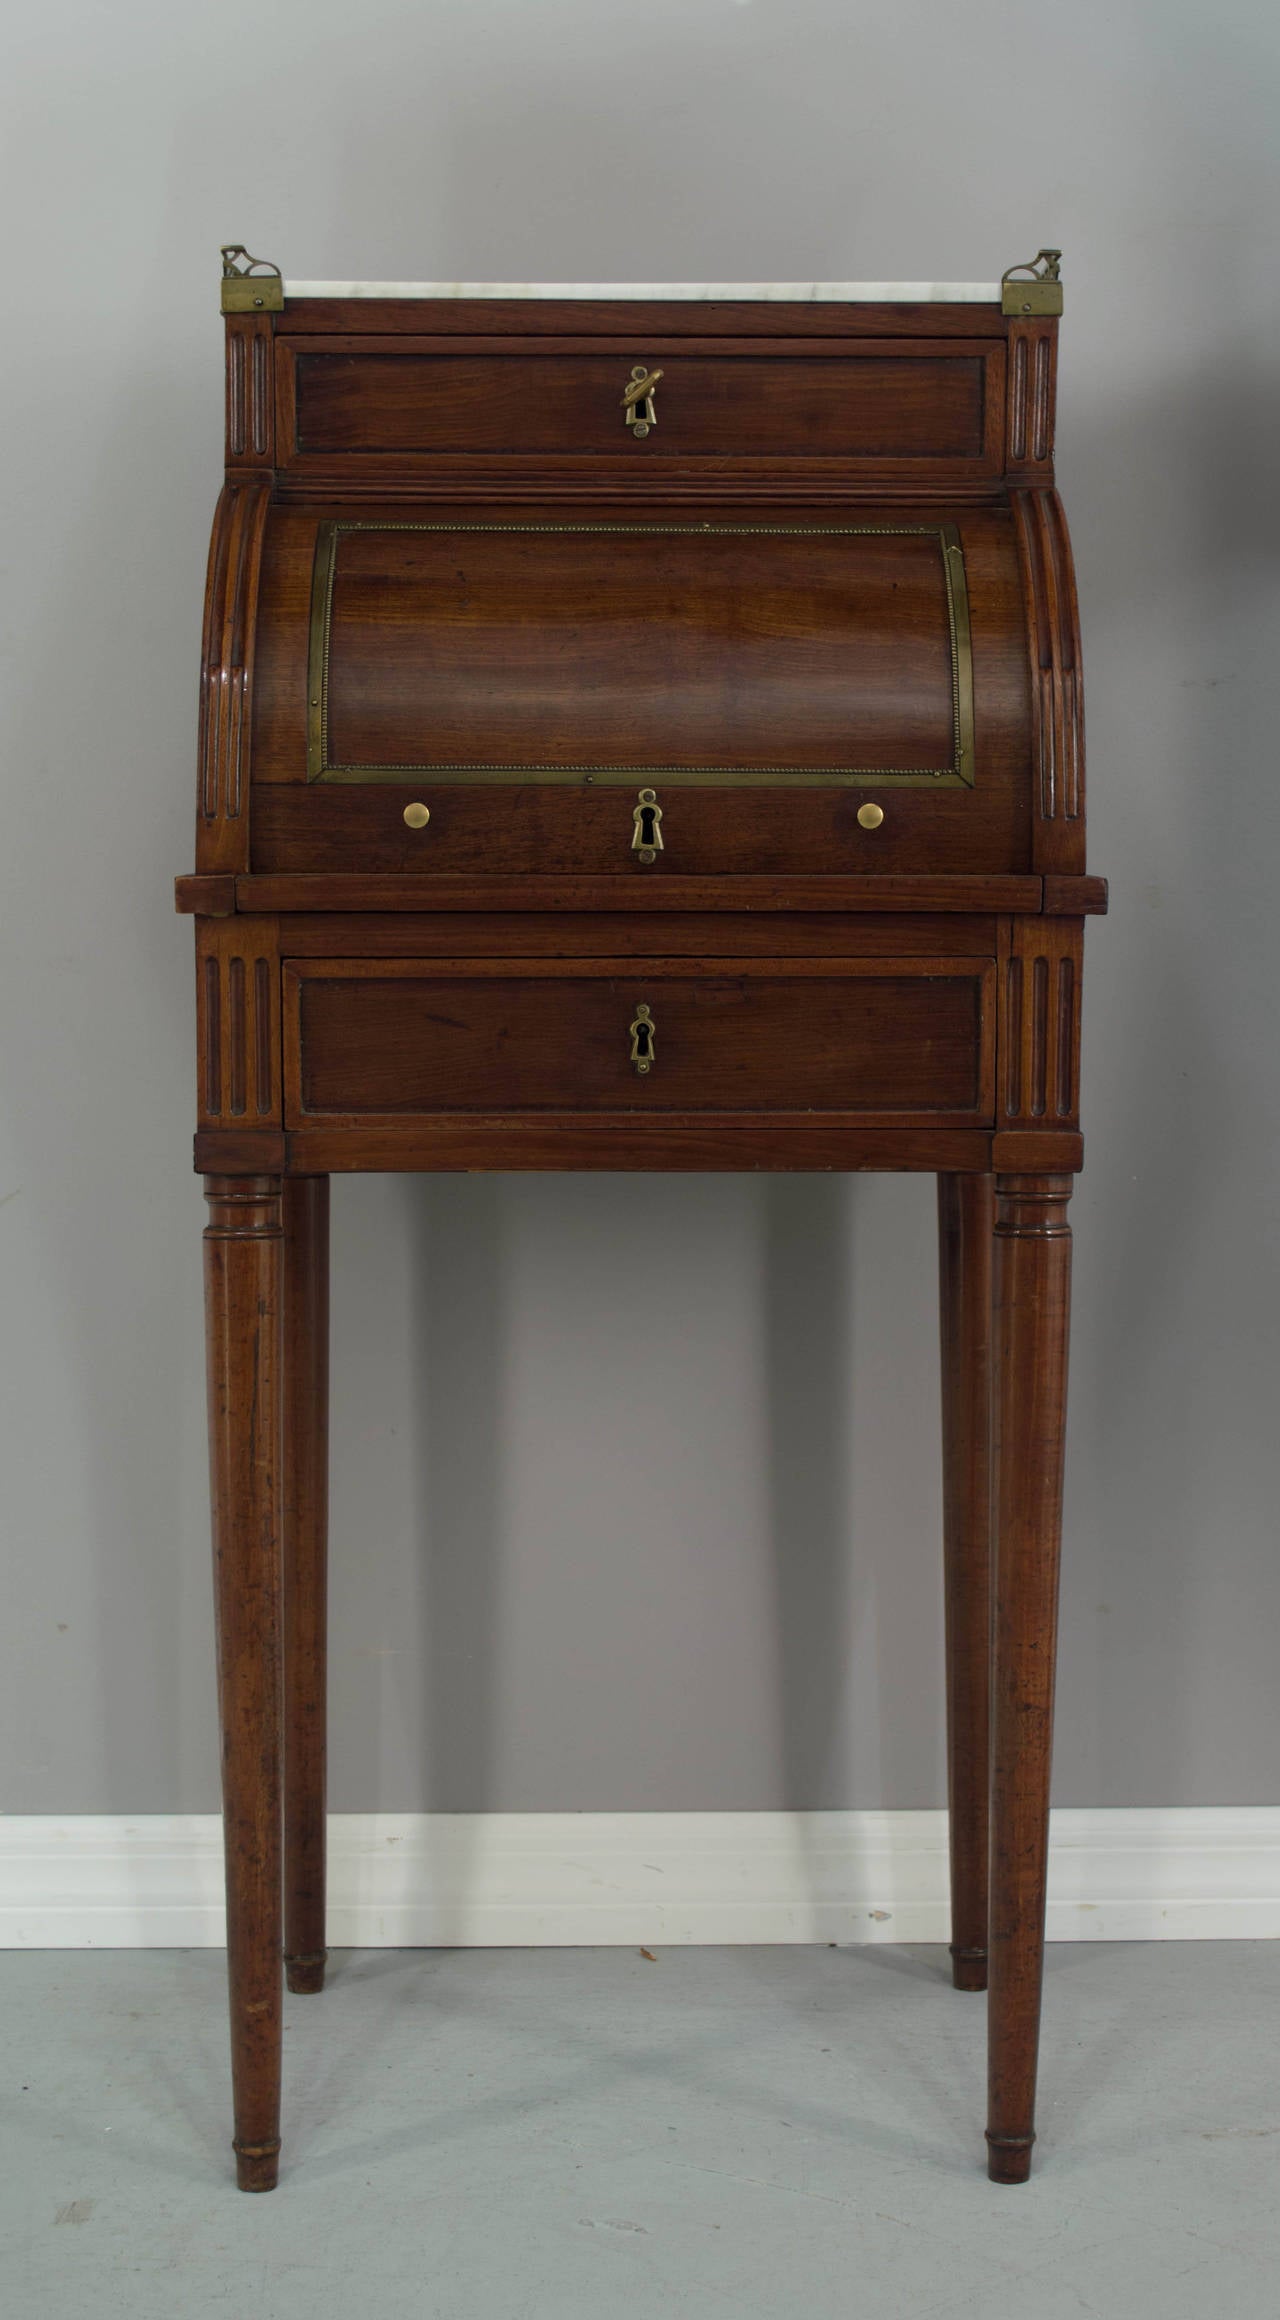 A nice small 19th century Louis XVI style desk, made of mahogany with dovetail construction. Marble top surrounded by a brass gallery and bronze hardware. Two locking drawers in working order with one key. Desk rolls open and pulls out to reveal a